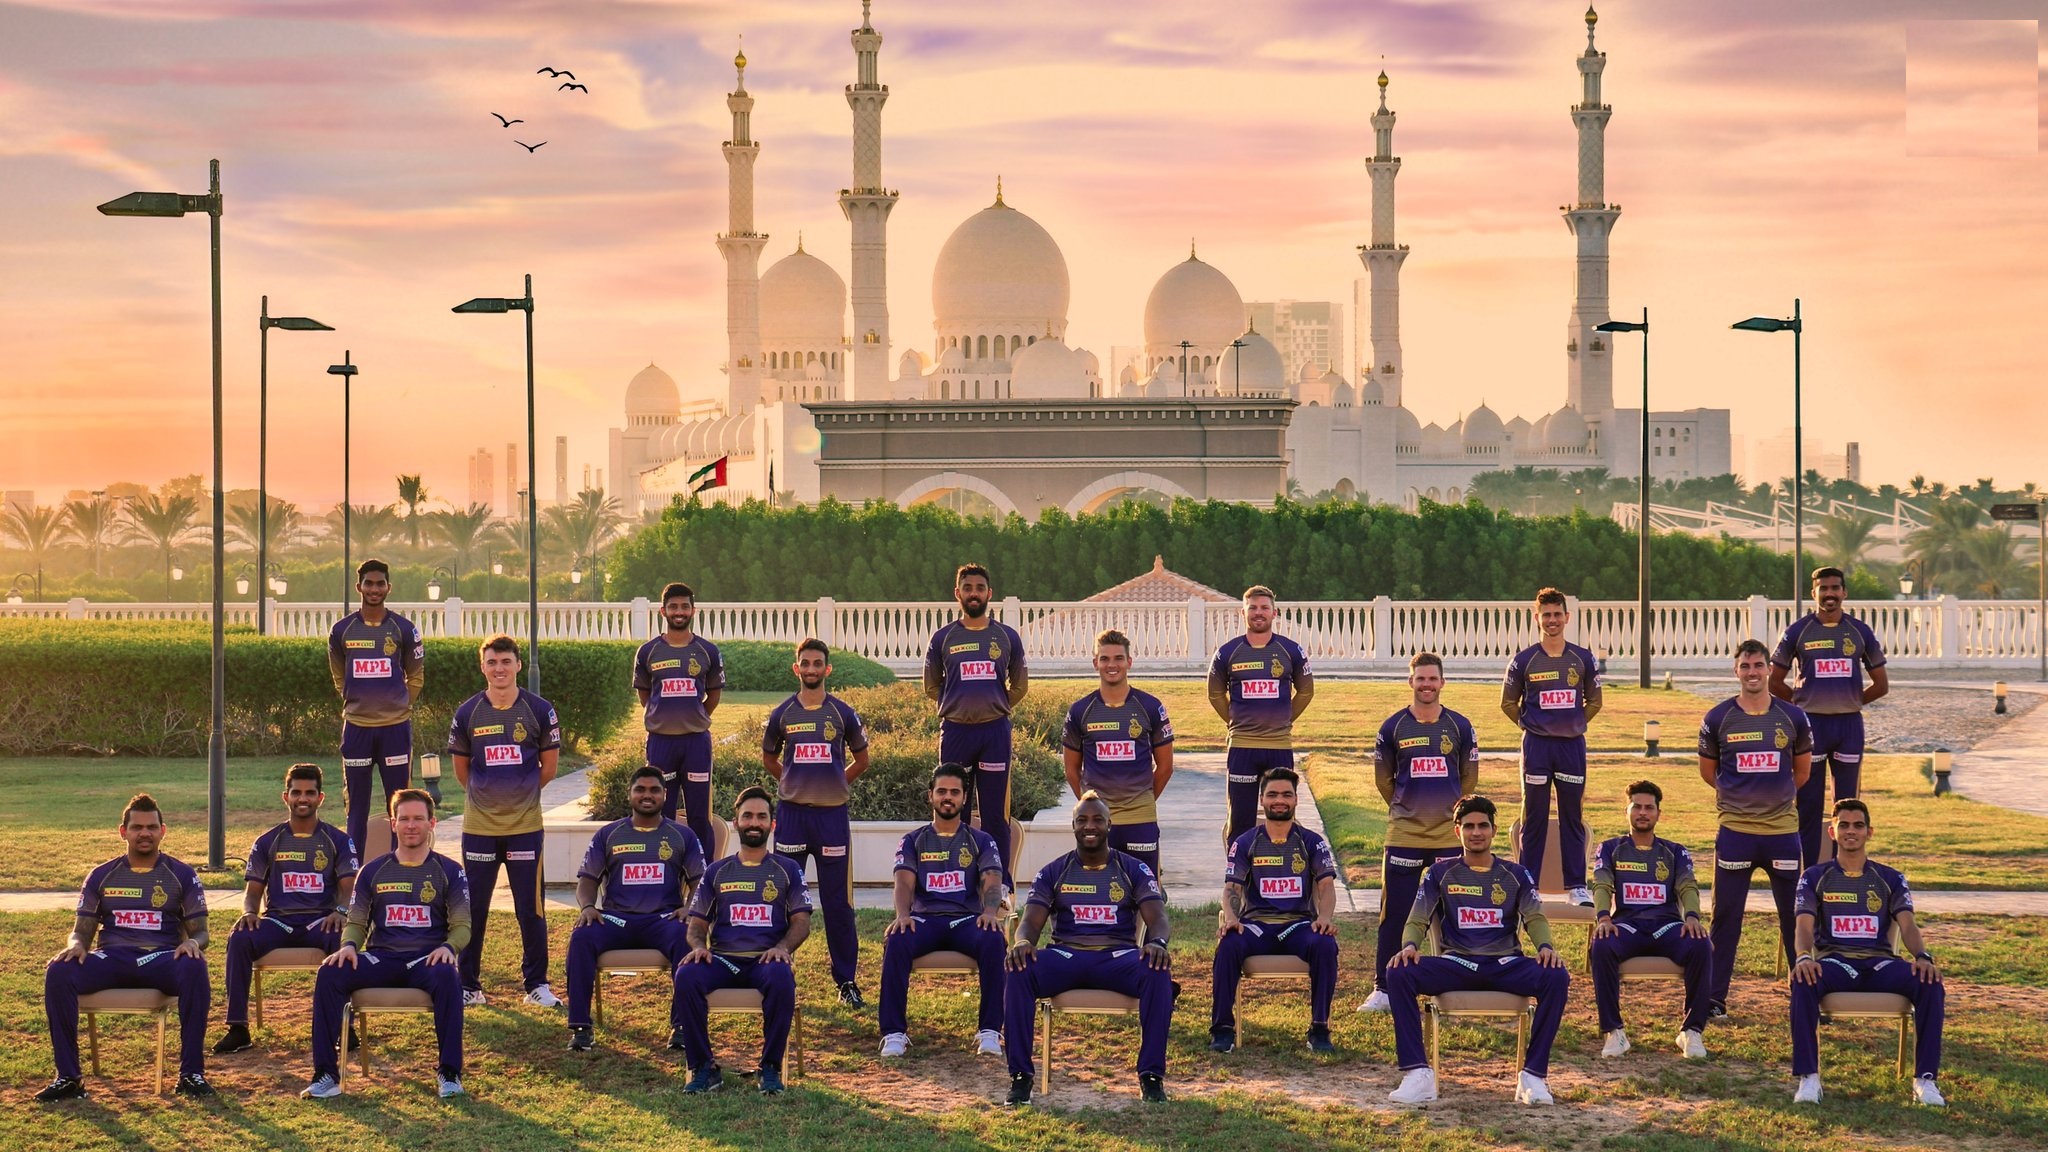 Eoin Morgan and KKR squad pose for a group photo | KKR Twitter